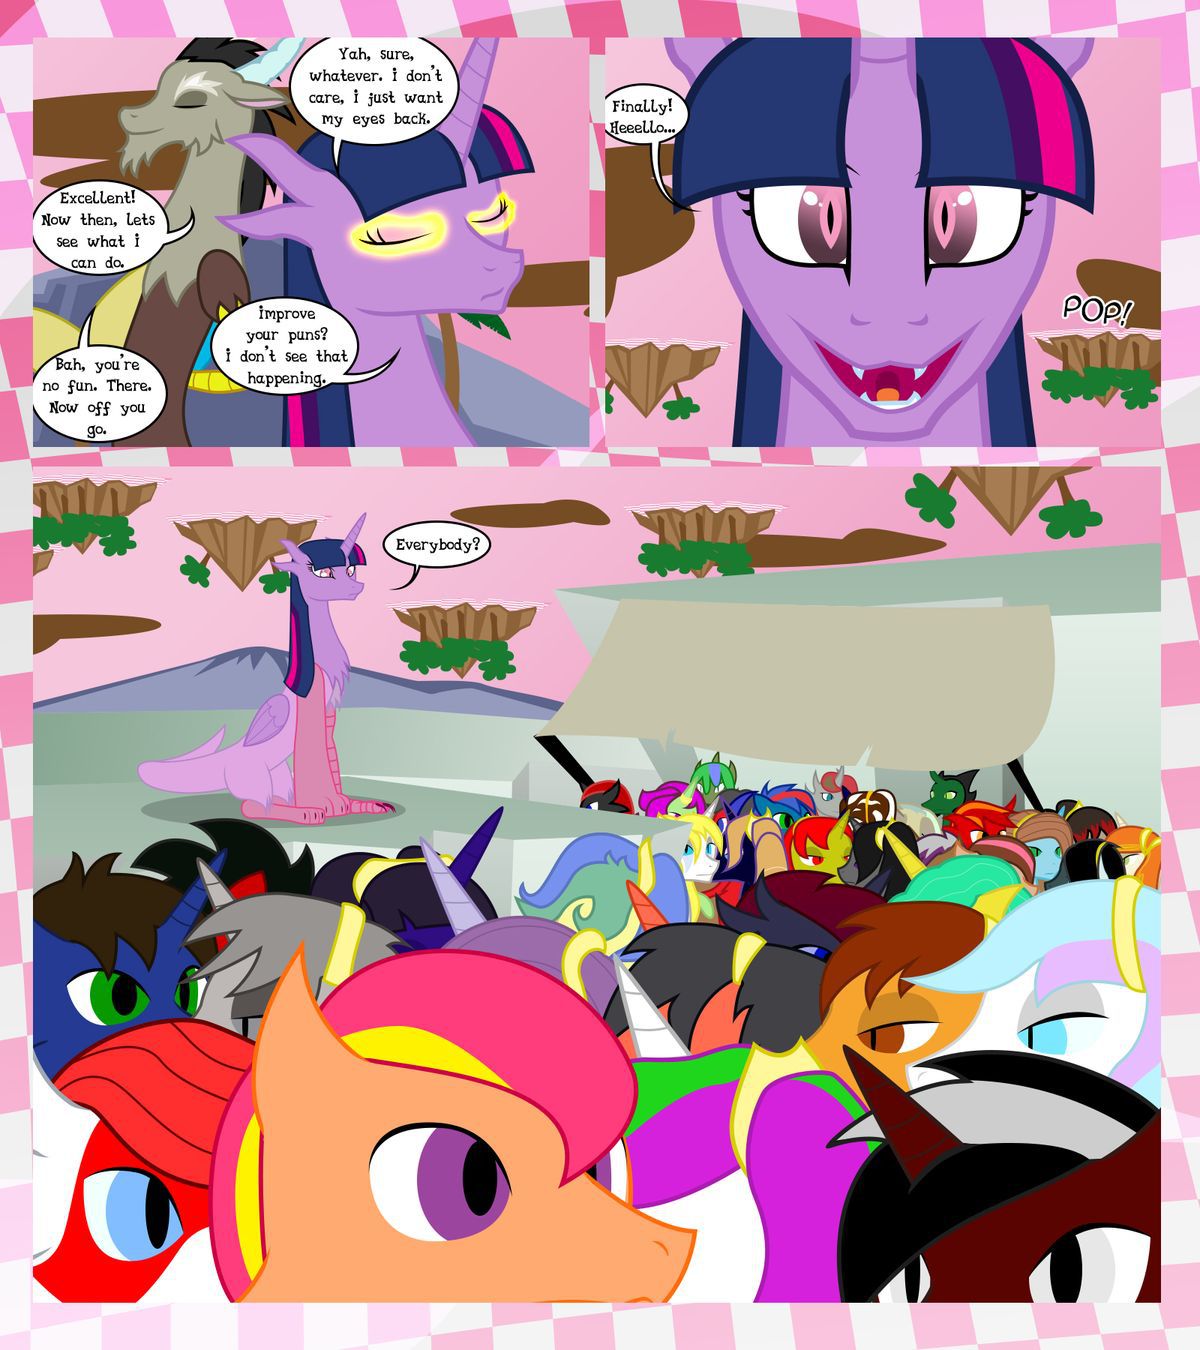 [GatesMcCloud] Cutie Mark Crusaders 10k: Chapter 3 - The Lost (My Little Pony: Friendship is Magic) [English] [Ongoing] 33